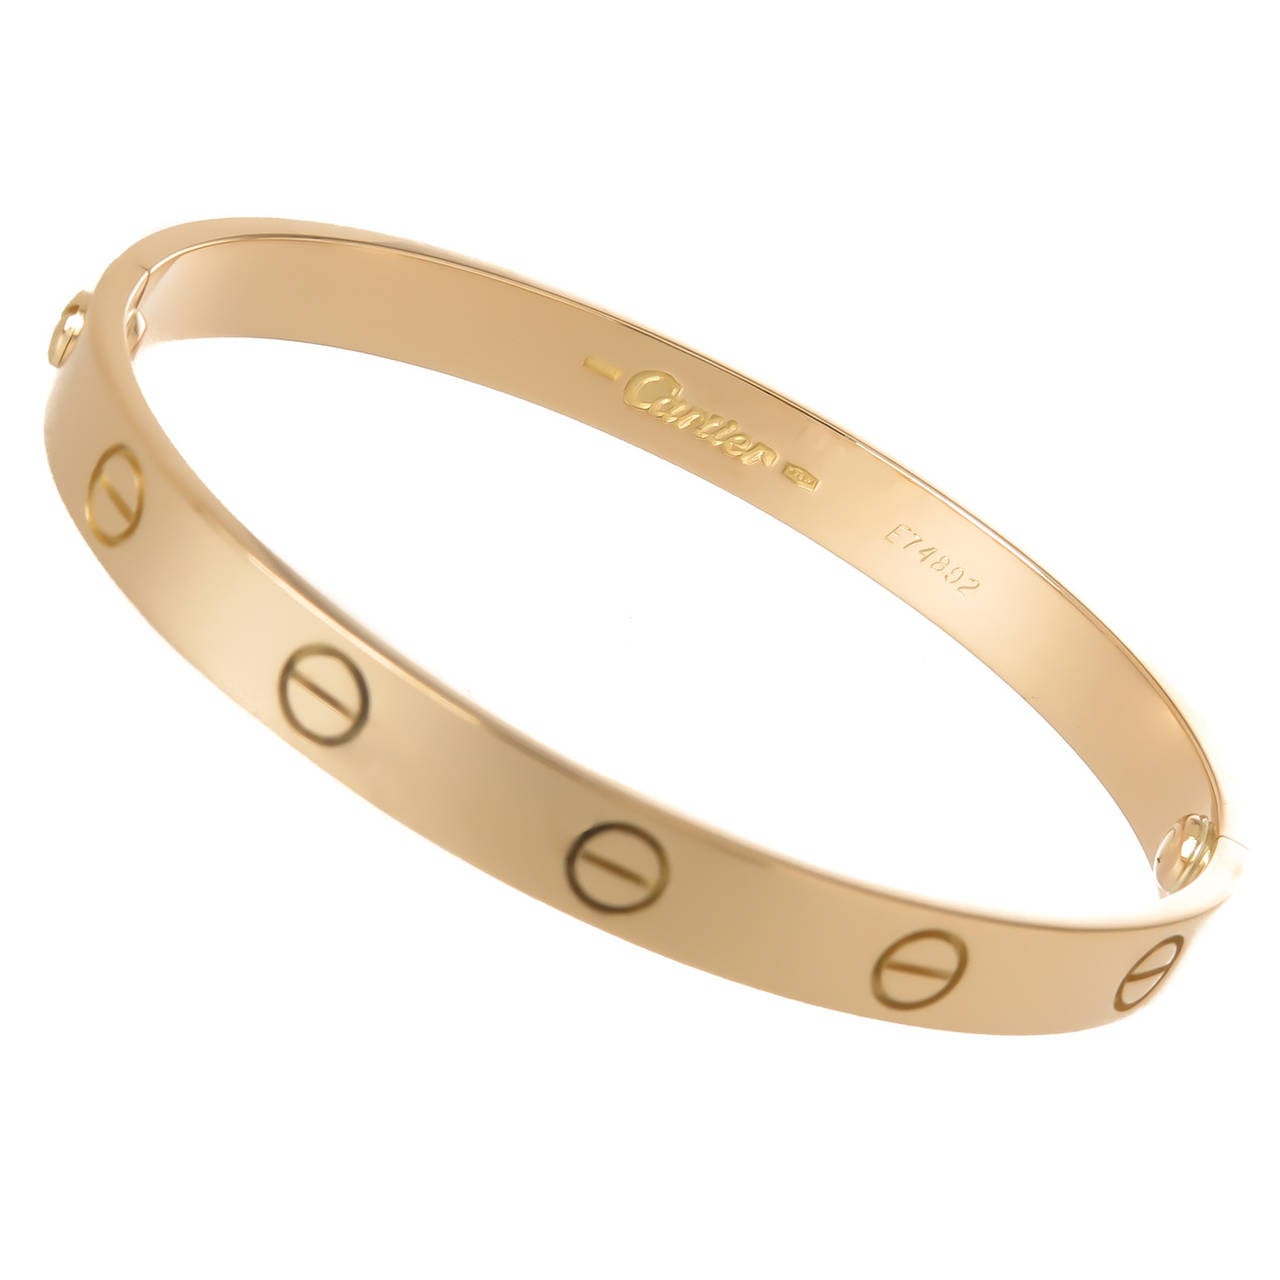 Circa 1998 Cartier 18K Yellow Gold Love Bracelet, size 17, signed, numbered and comes with original Love Bracelet Screw driver, felt pouch and original purchase Receipt.